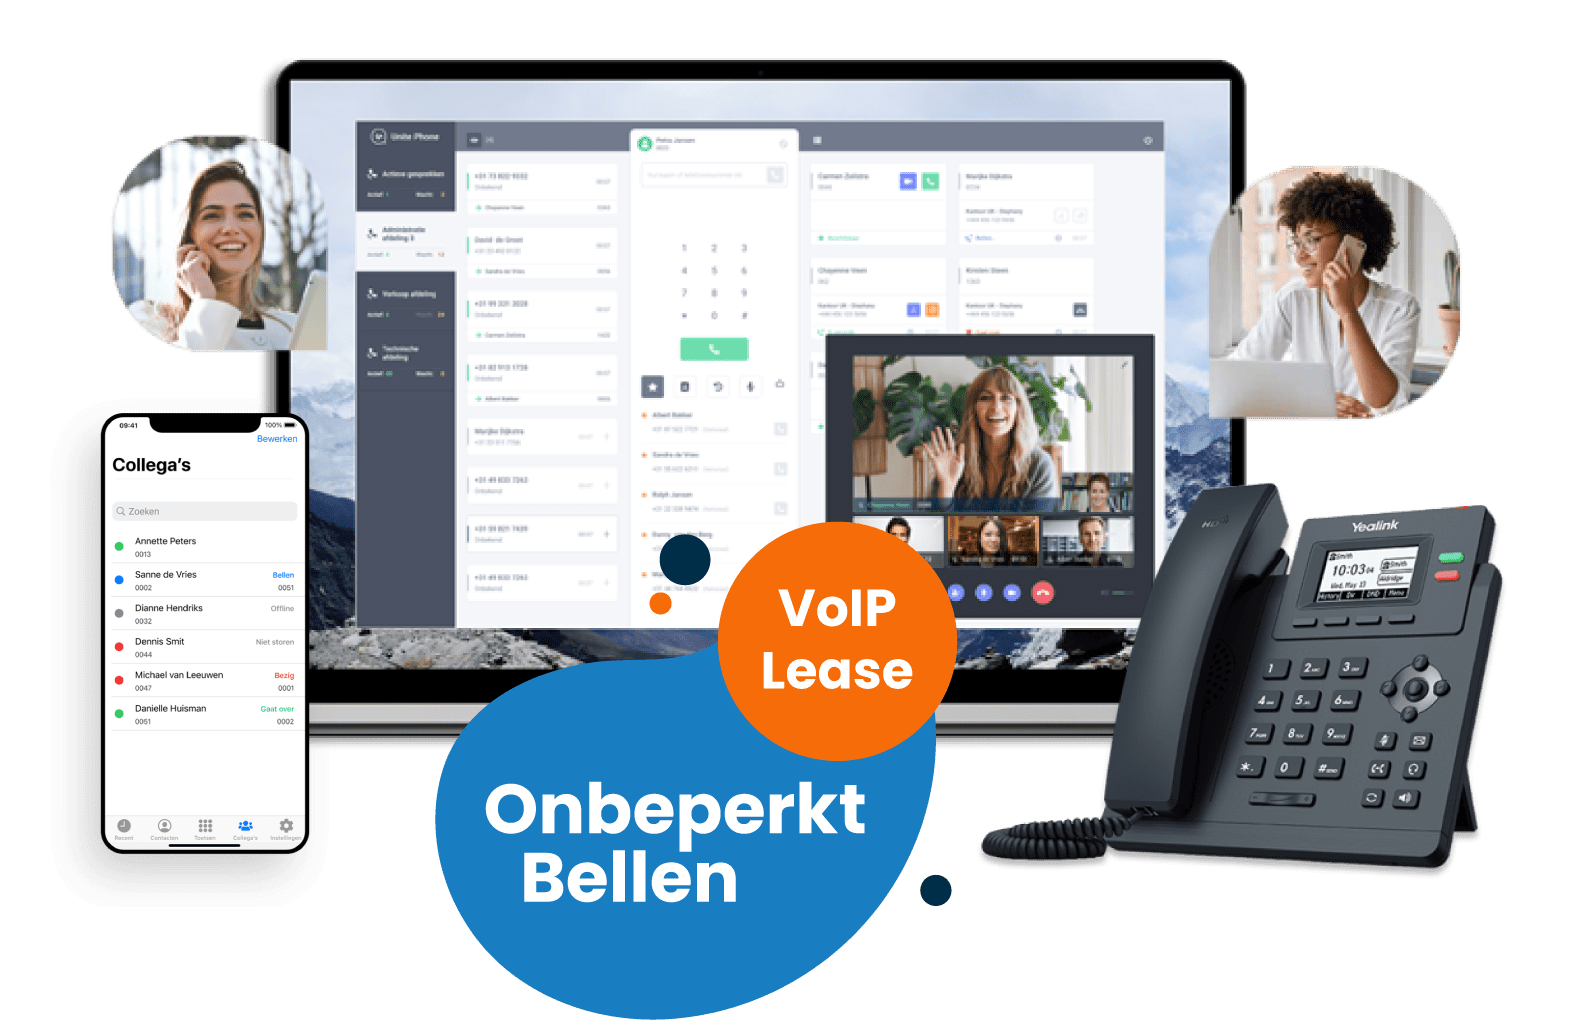 VoIP Lease Compleet